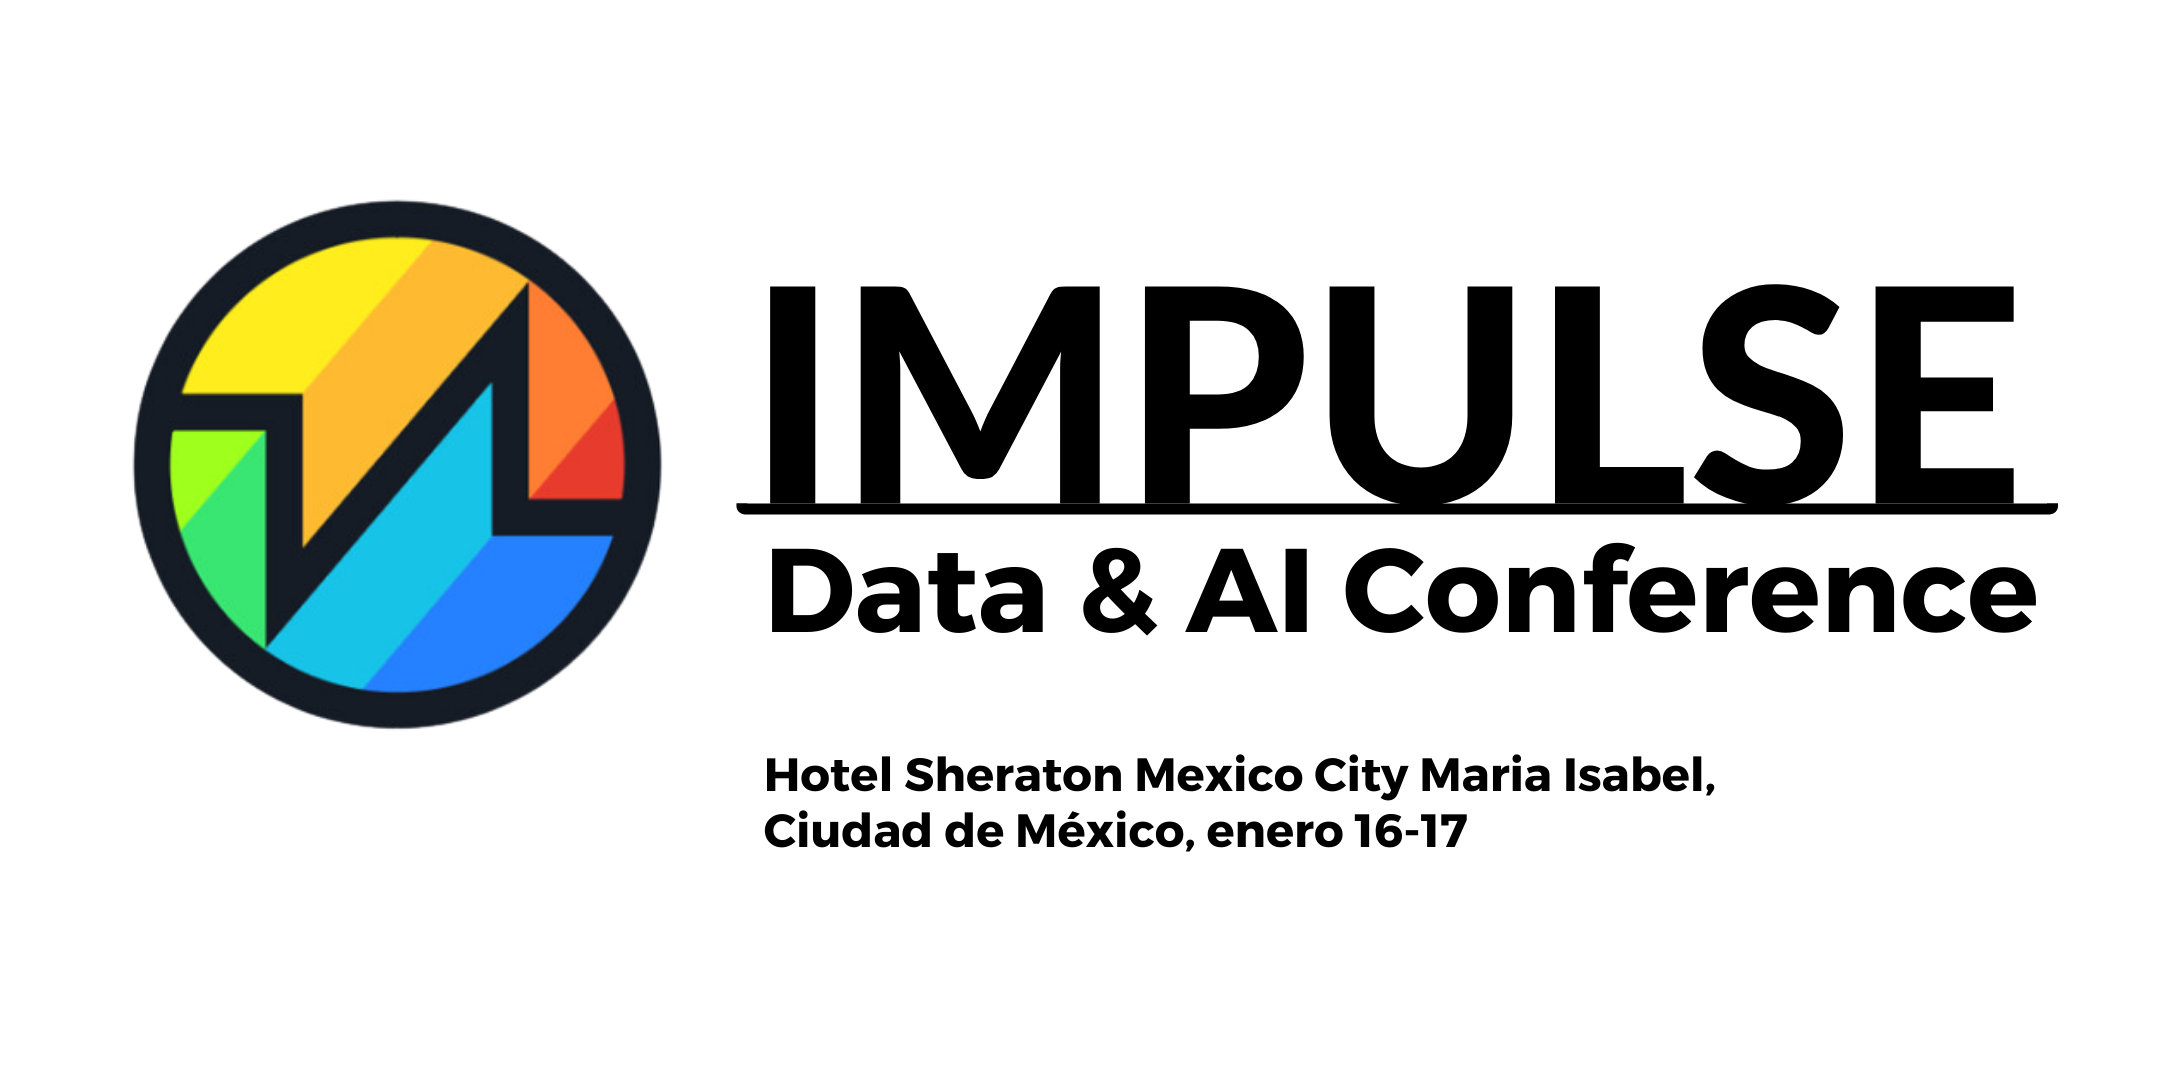 impulse-ai-conference-1.png